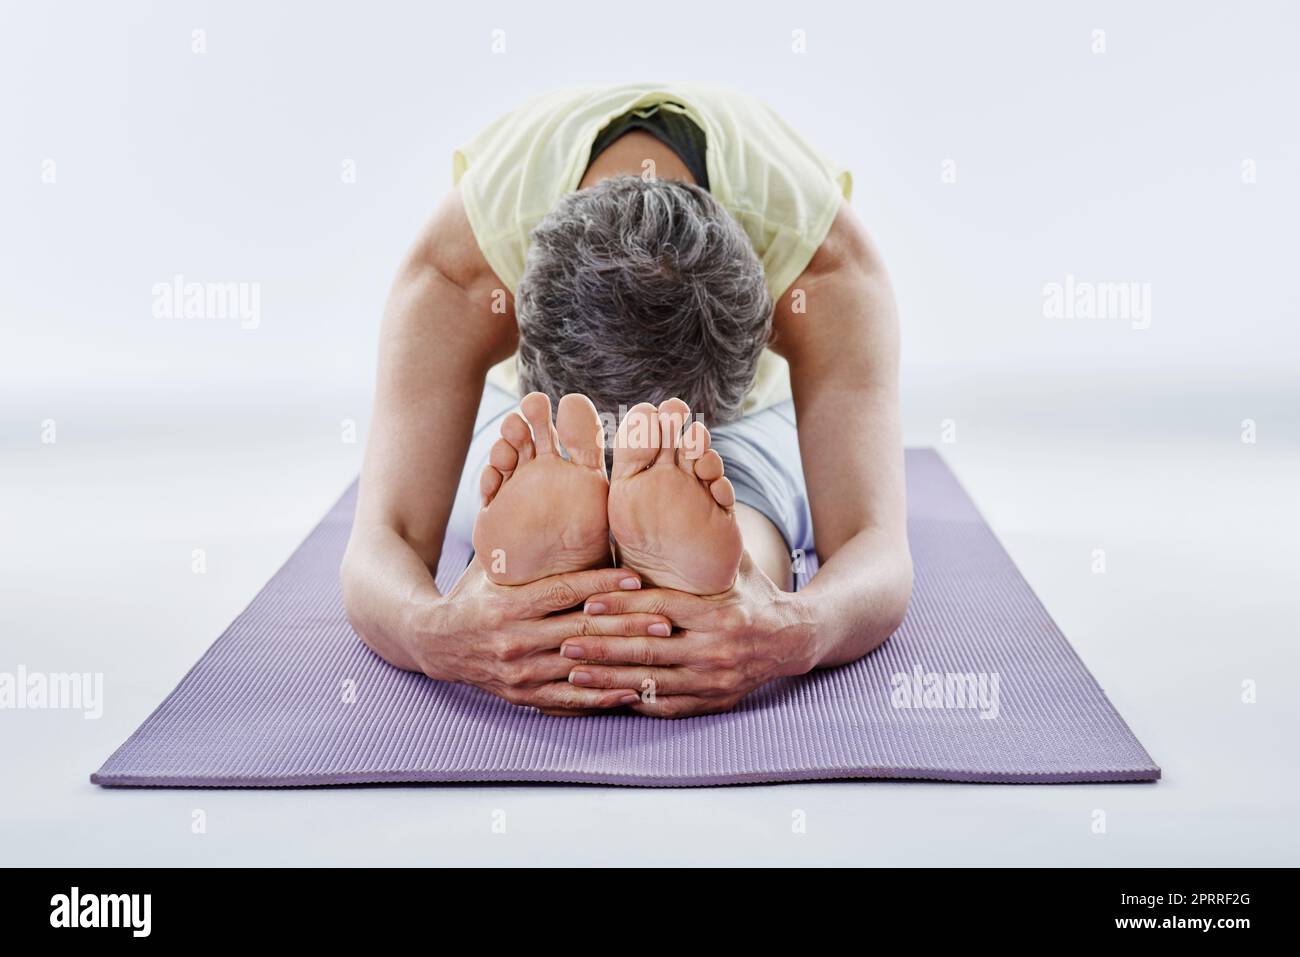 Pre-workout warmup. Full length shot of a woman stretching before yoga. Stock Photo